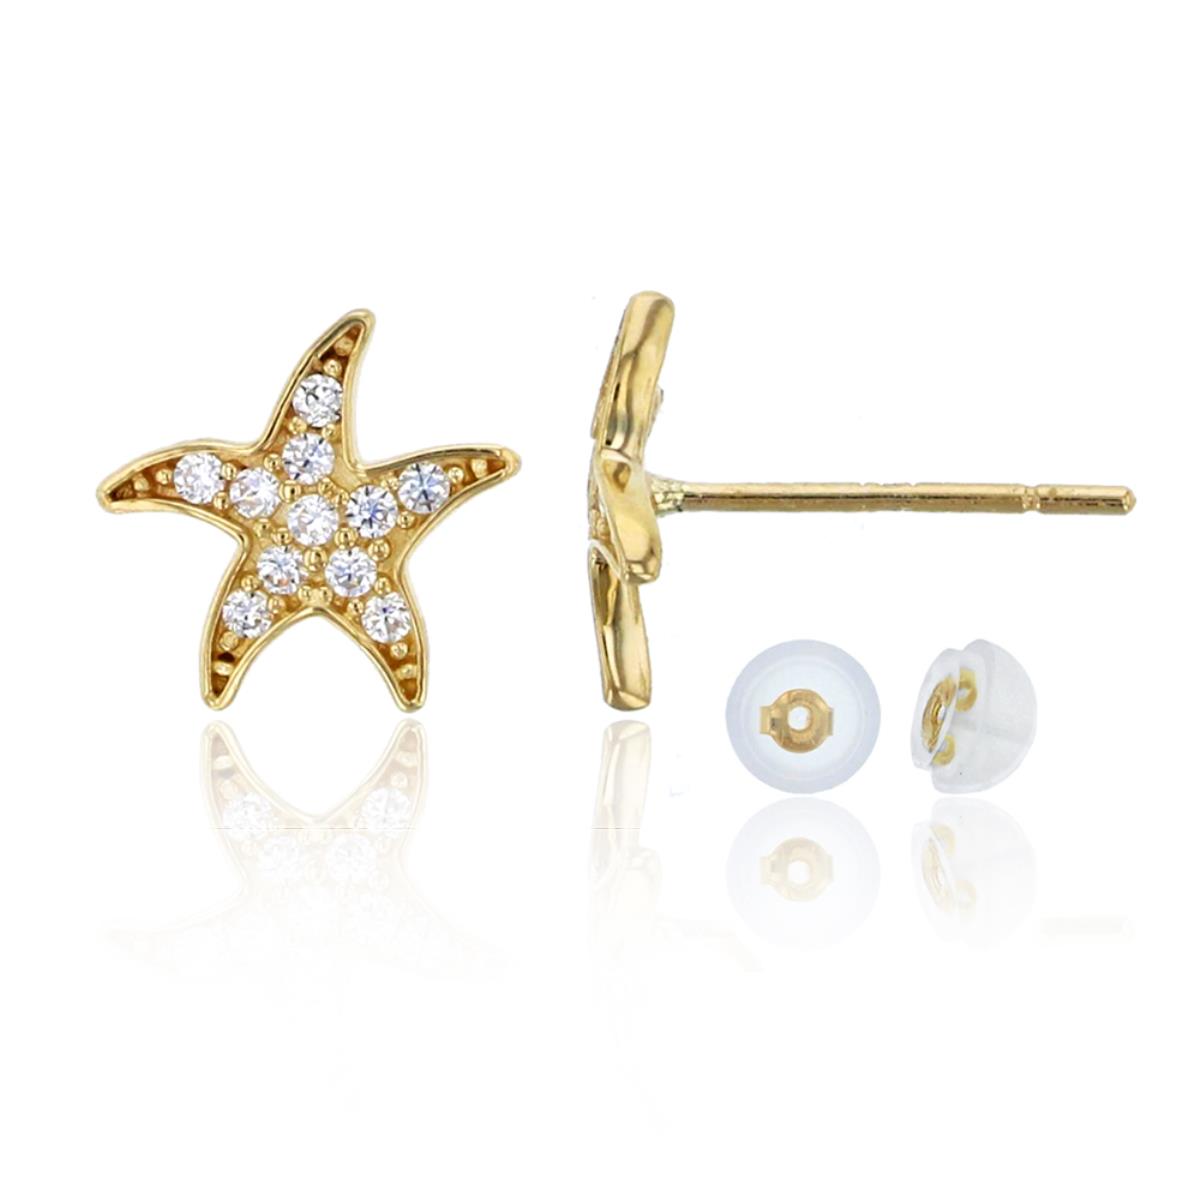 10K Yellow Gold Micropave 7x8mm Starfish CZ Stud Earring & 10K Silicone Back